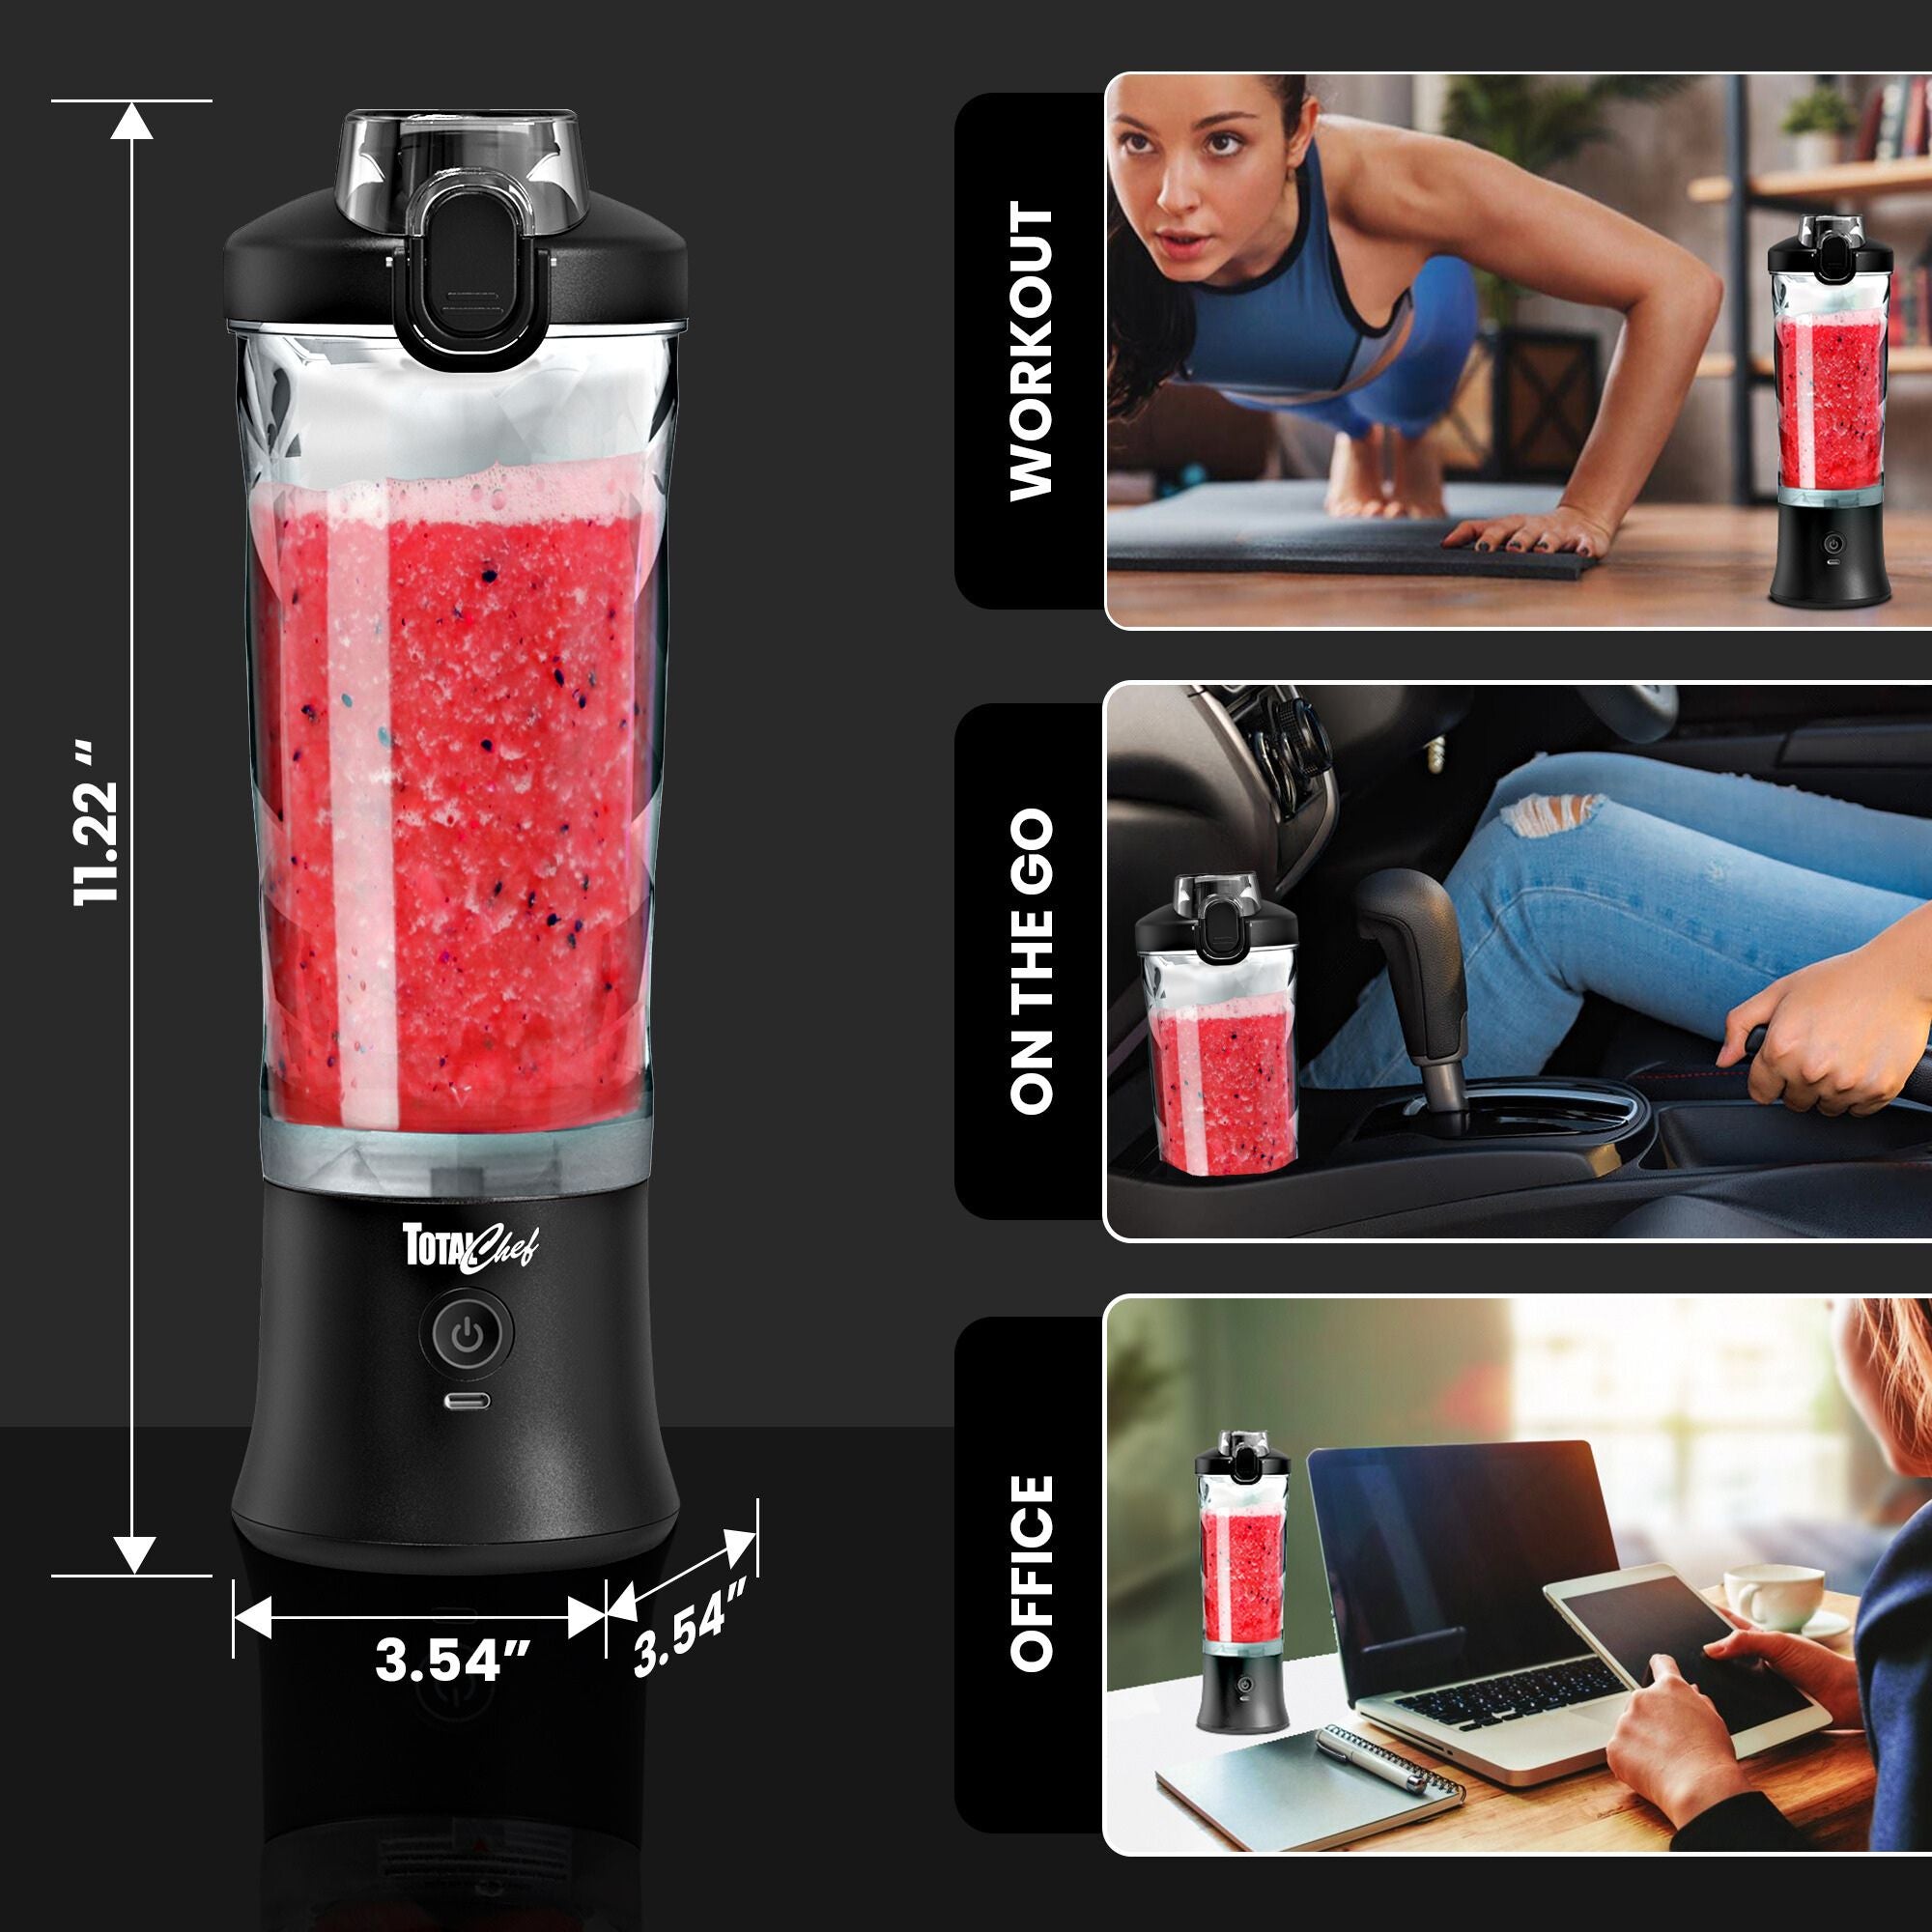 On the left is a product shot of the Total Chef portable blender filled with bright red smoothie on a black background with dimensions labeled. Three inset images on the right show settings where you could use the blender, labeled: Workout; on the go; and office.